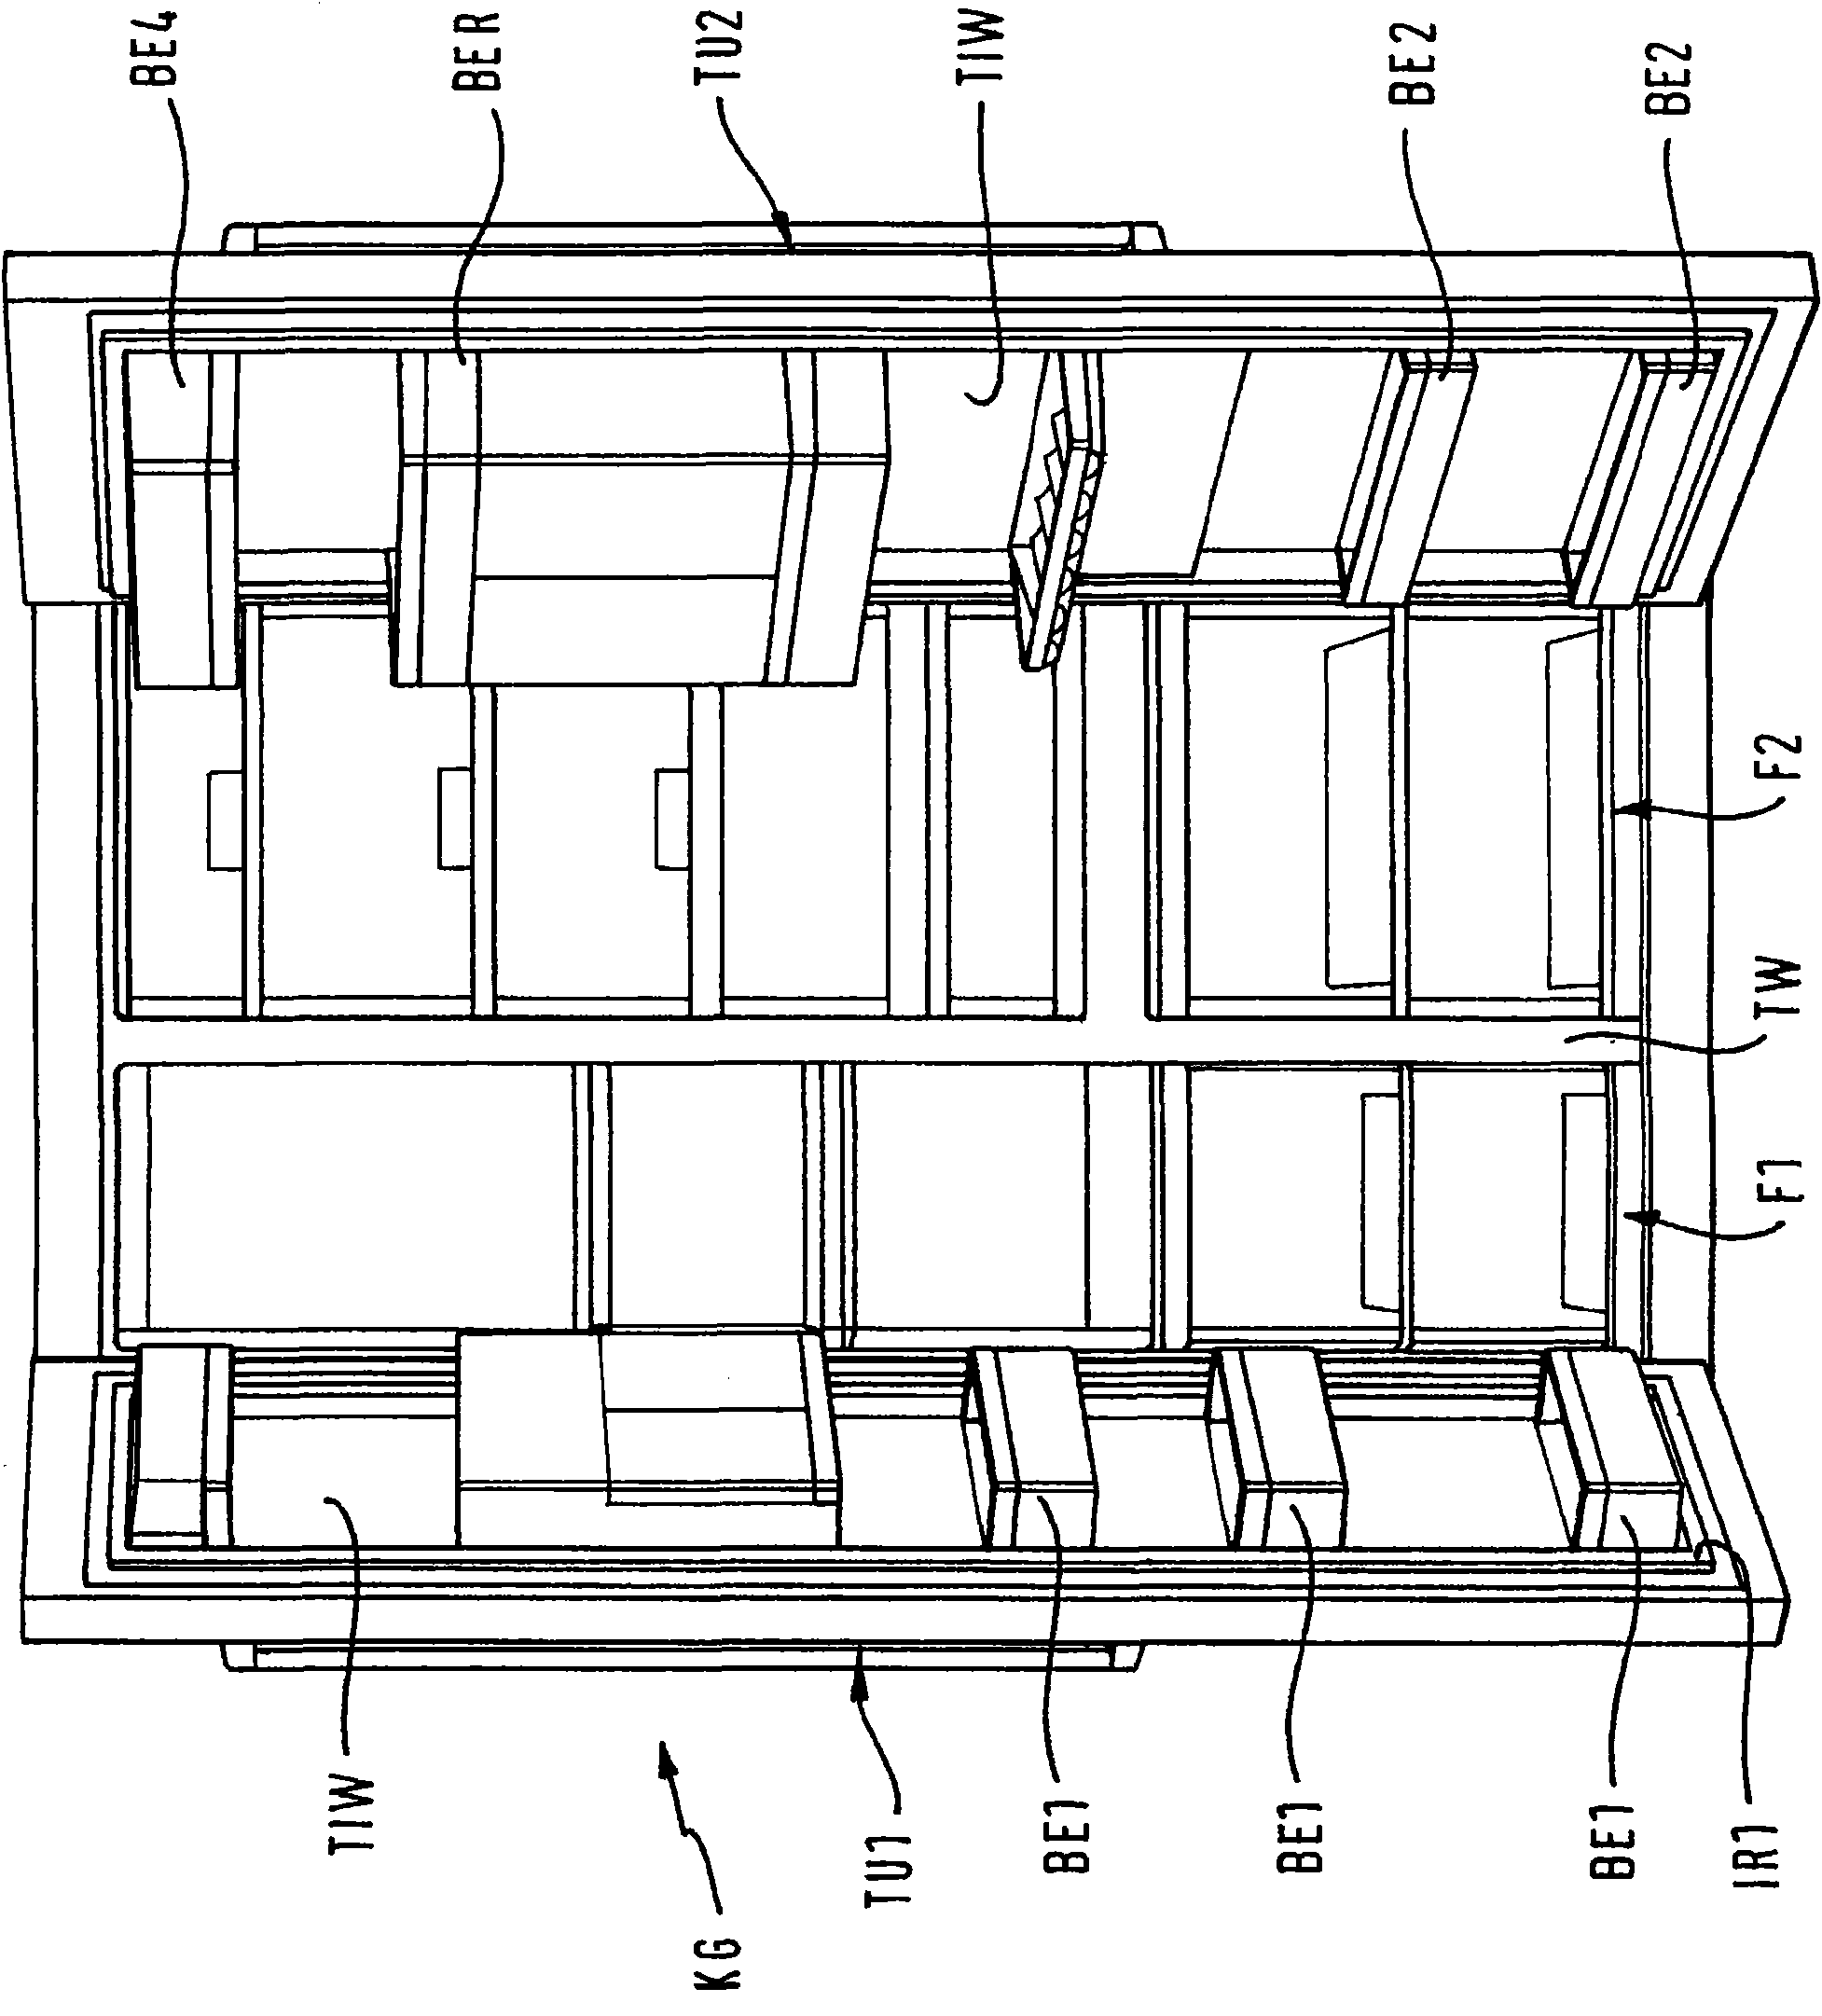 Refrigerator and associated storage container